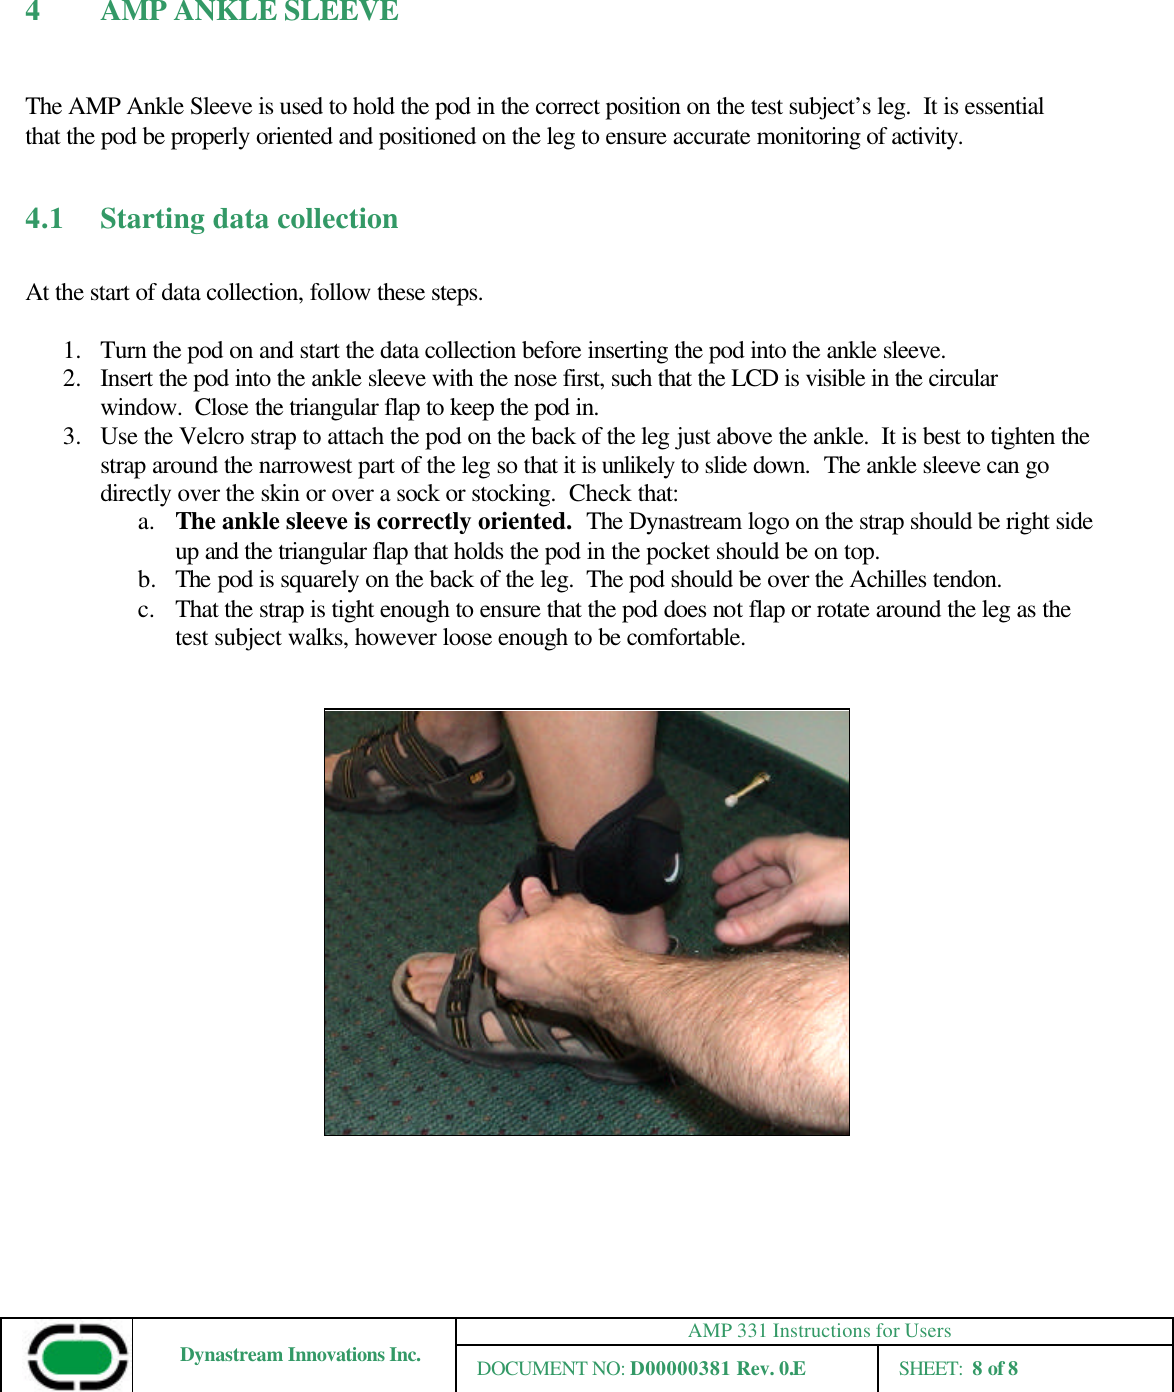 AMP 331 Instructions for Users Dynastream Innovations Inc. DOCUMENT NO: D00000381 Rev. 0.E SHEET:  8 of 8  4 AMP ANKLE SLEEVE   The AMP Ankle Sleeve is used to hold the pod in the correct position on the test subject’s leg.  It is essential that the pod be properly oriented and positioned on the leg to ensure accurate monitoring of activity.    4.1 Starting data collection  At the start of data collection, follow these steps.  1.  Turn the pod on and start the data collection before inserting the pod into the ankle sleeve. 2.  Insert the pod into the ankle sleeve with the nose first, such that the LCD is visible in the circular window.  Close the triangular flap to keep the pod in. 3.  Use the Velcro strap to attach the pod on the back of the leg just above the ankle.  It is best to tighten the strap around the narrowest part of the leg so that it is unlikely to slide down.  The ankle sleeve can go directly over the skin or over a sock or stocking.  Check that: a. The ankle sleeve is correctly oriented.  The Dynastream logo on the strap should be right side up and the triangular flap that holds the pod in the pocket should be on top. b.  The pod is squarely on the back of the leg.  The pod should be over the Achilles tendon. c. That the strap is tight enough to ensure that the pod does not flap or rotate around the leg as the test subject walks, however loose enough to be comfortable.      